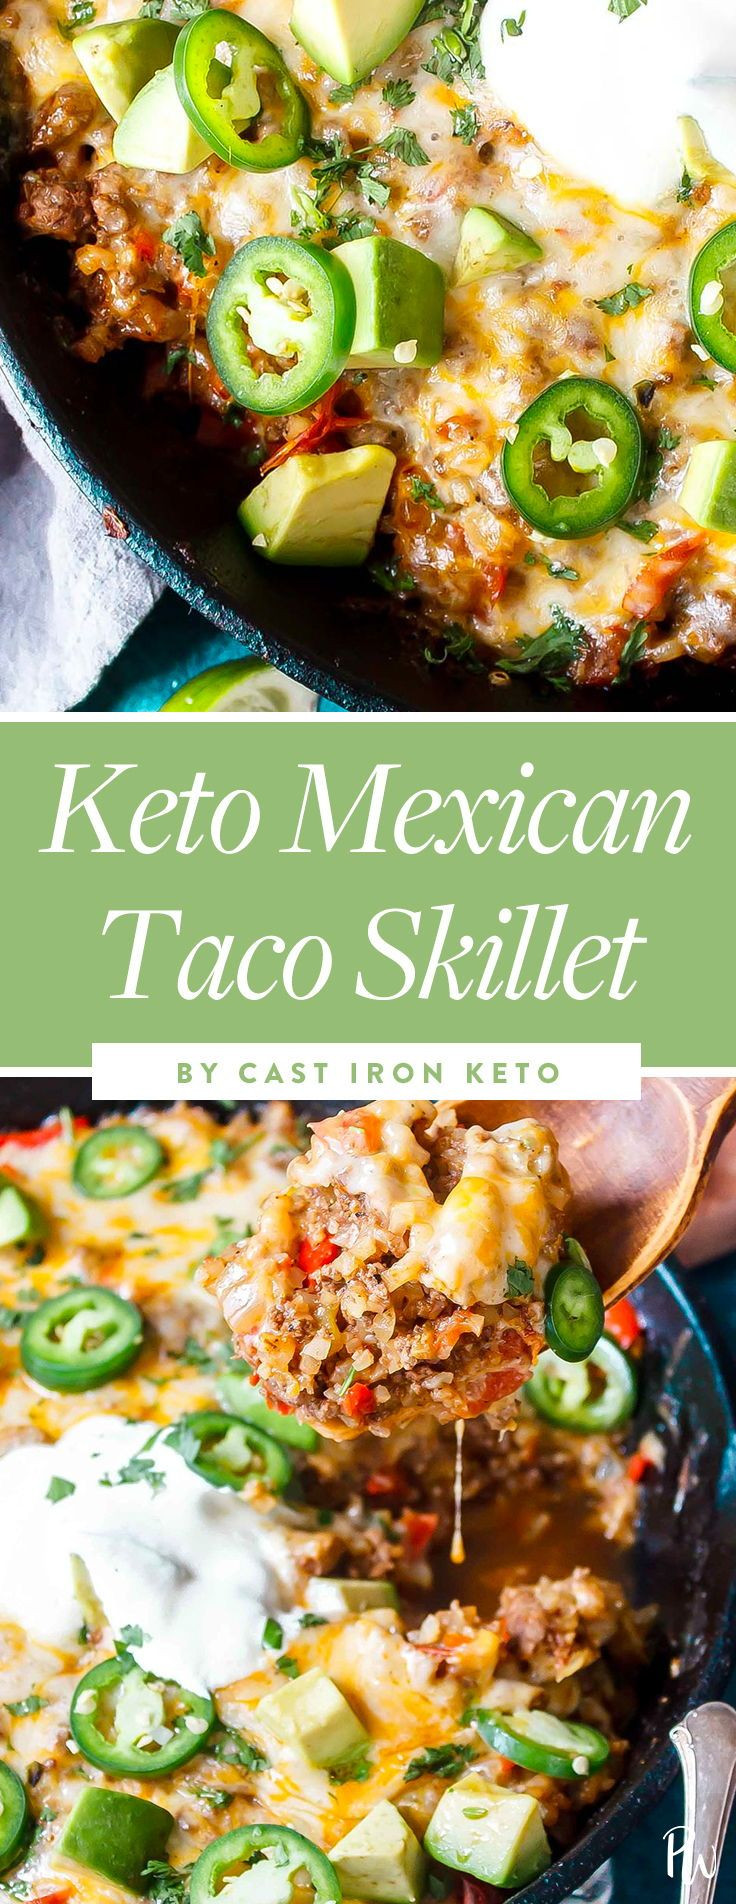 Keto Dinner Recipes Beef Mexican
 27 Keto Ground Beef Recipes for When You’re Sick of